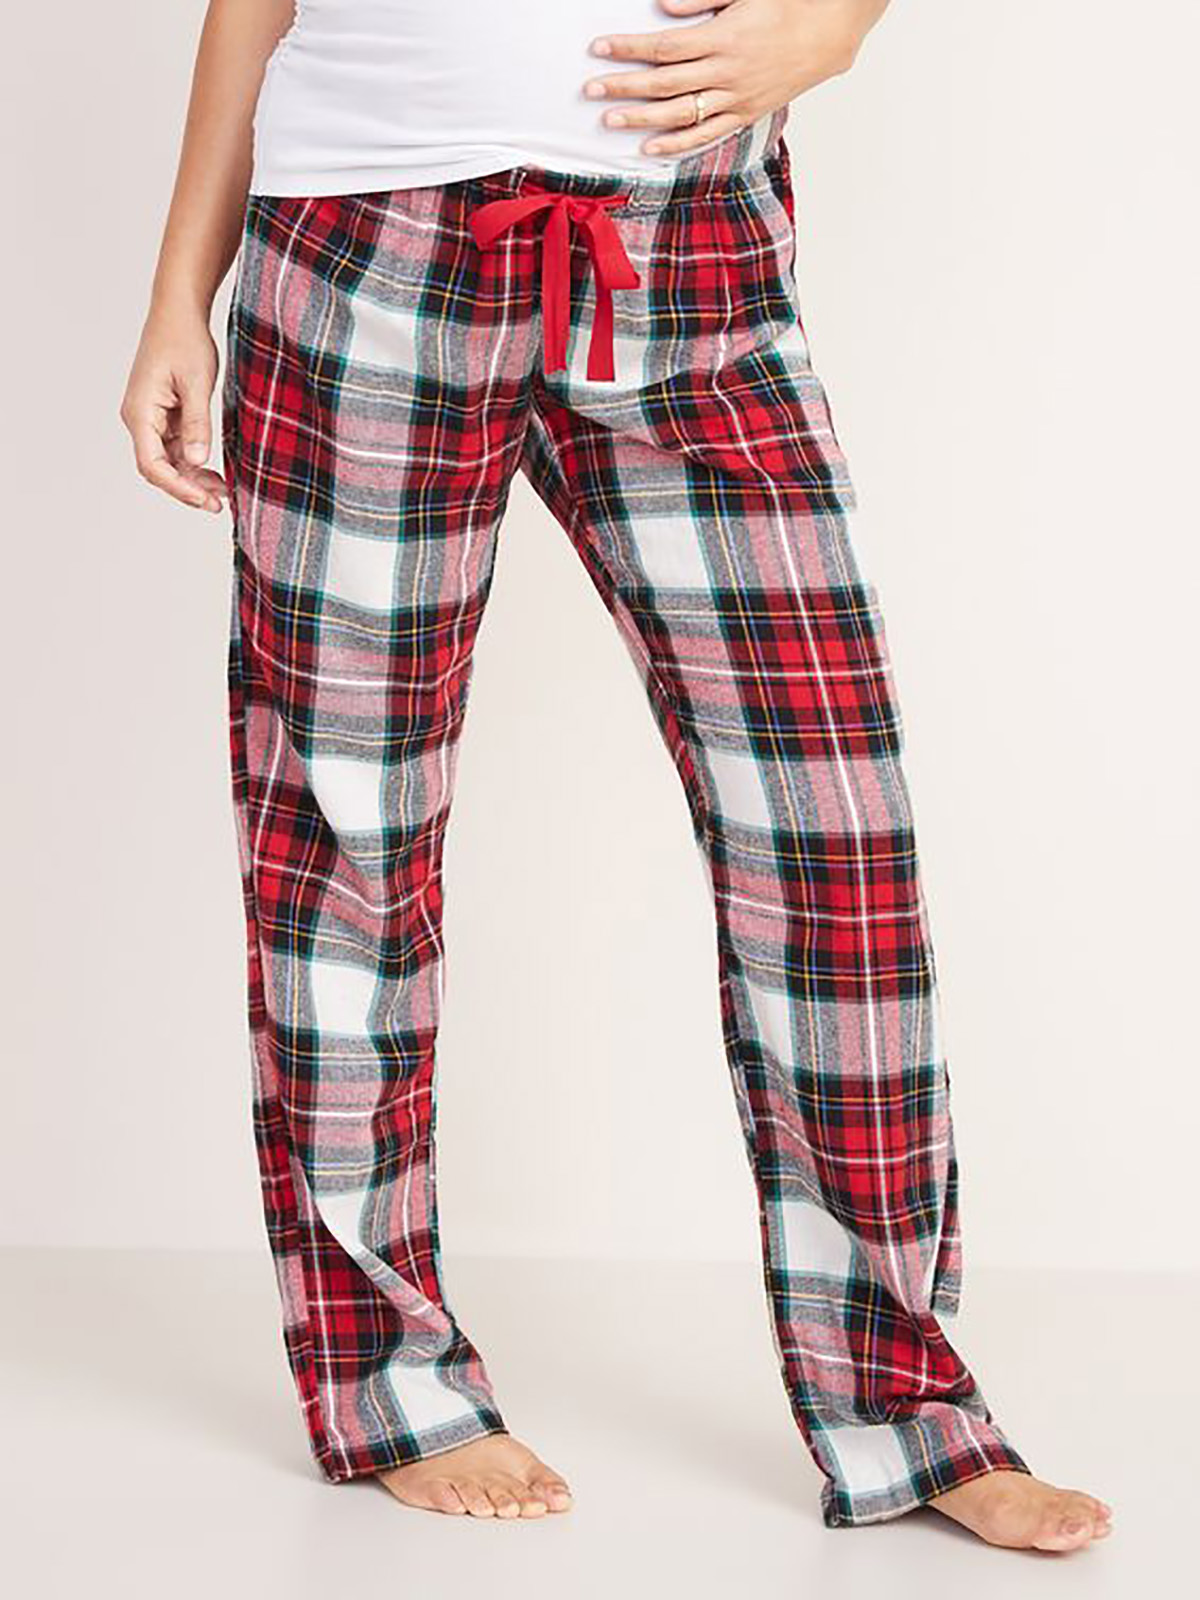 Old Navy - - Old Navy RED Pure Cotton Tartan Pyjama Bottoms - Size 4 to ...